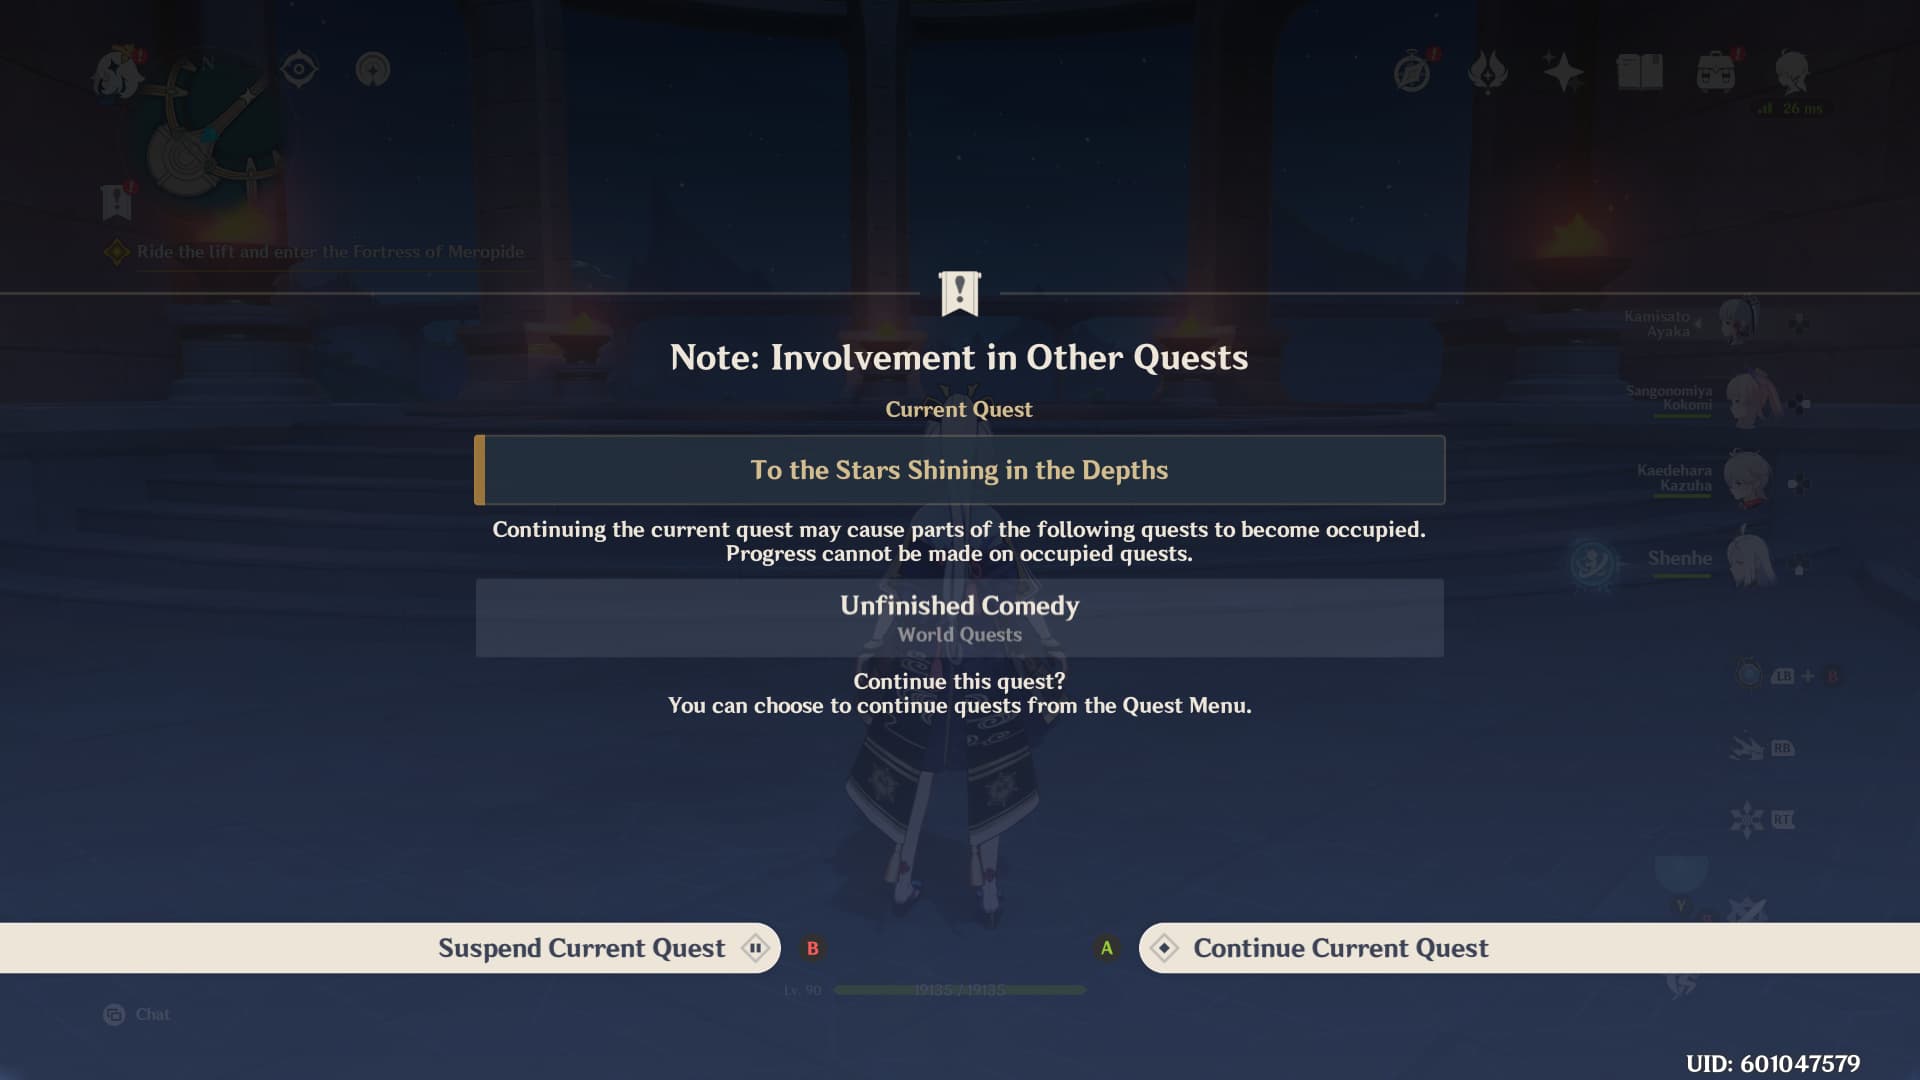 Genshin Impact 4.1 finally allows us to suspend active quests: in-game text allowing players to suspend quests in Genshin Impact